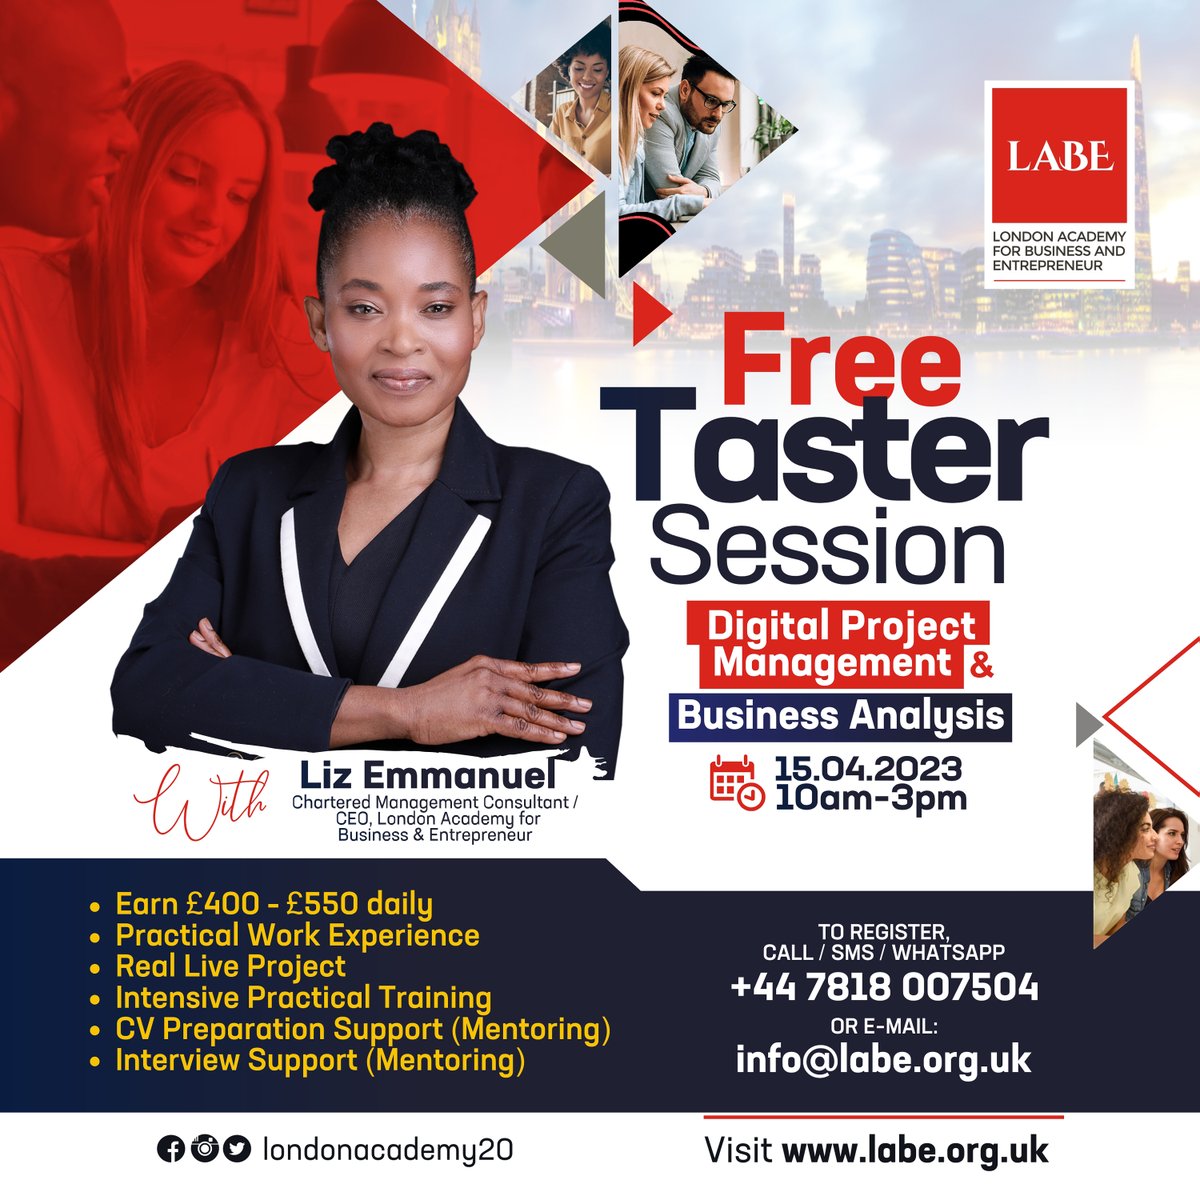 Great news to all aspiring project managers and business analysts!  LABE is offering you a FREE taster session in business analysis and project management. To book your seat, drop your
Full name, Email & Phone number.

#digitalprojectmanager
#businessanalyst
#LaBella
#SmartWork